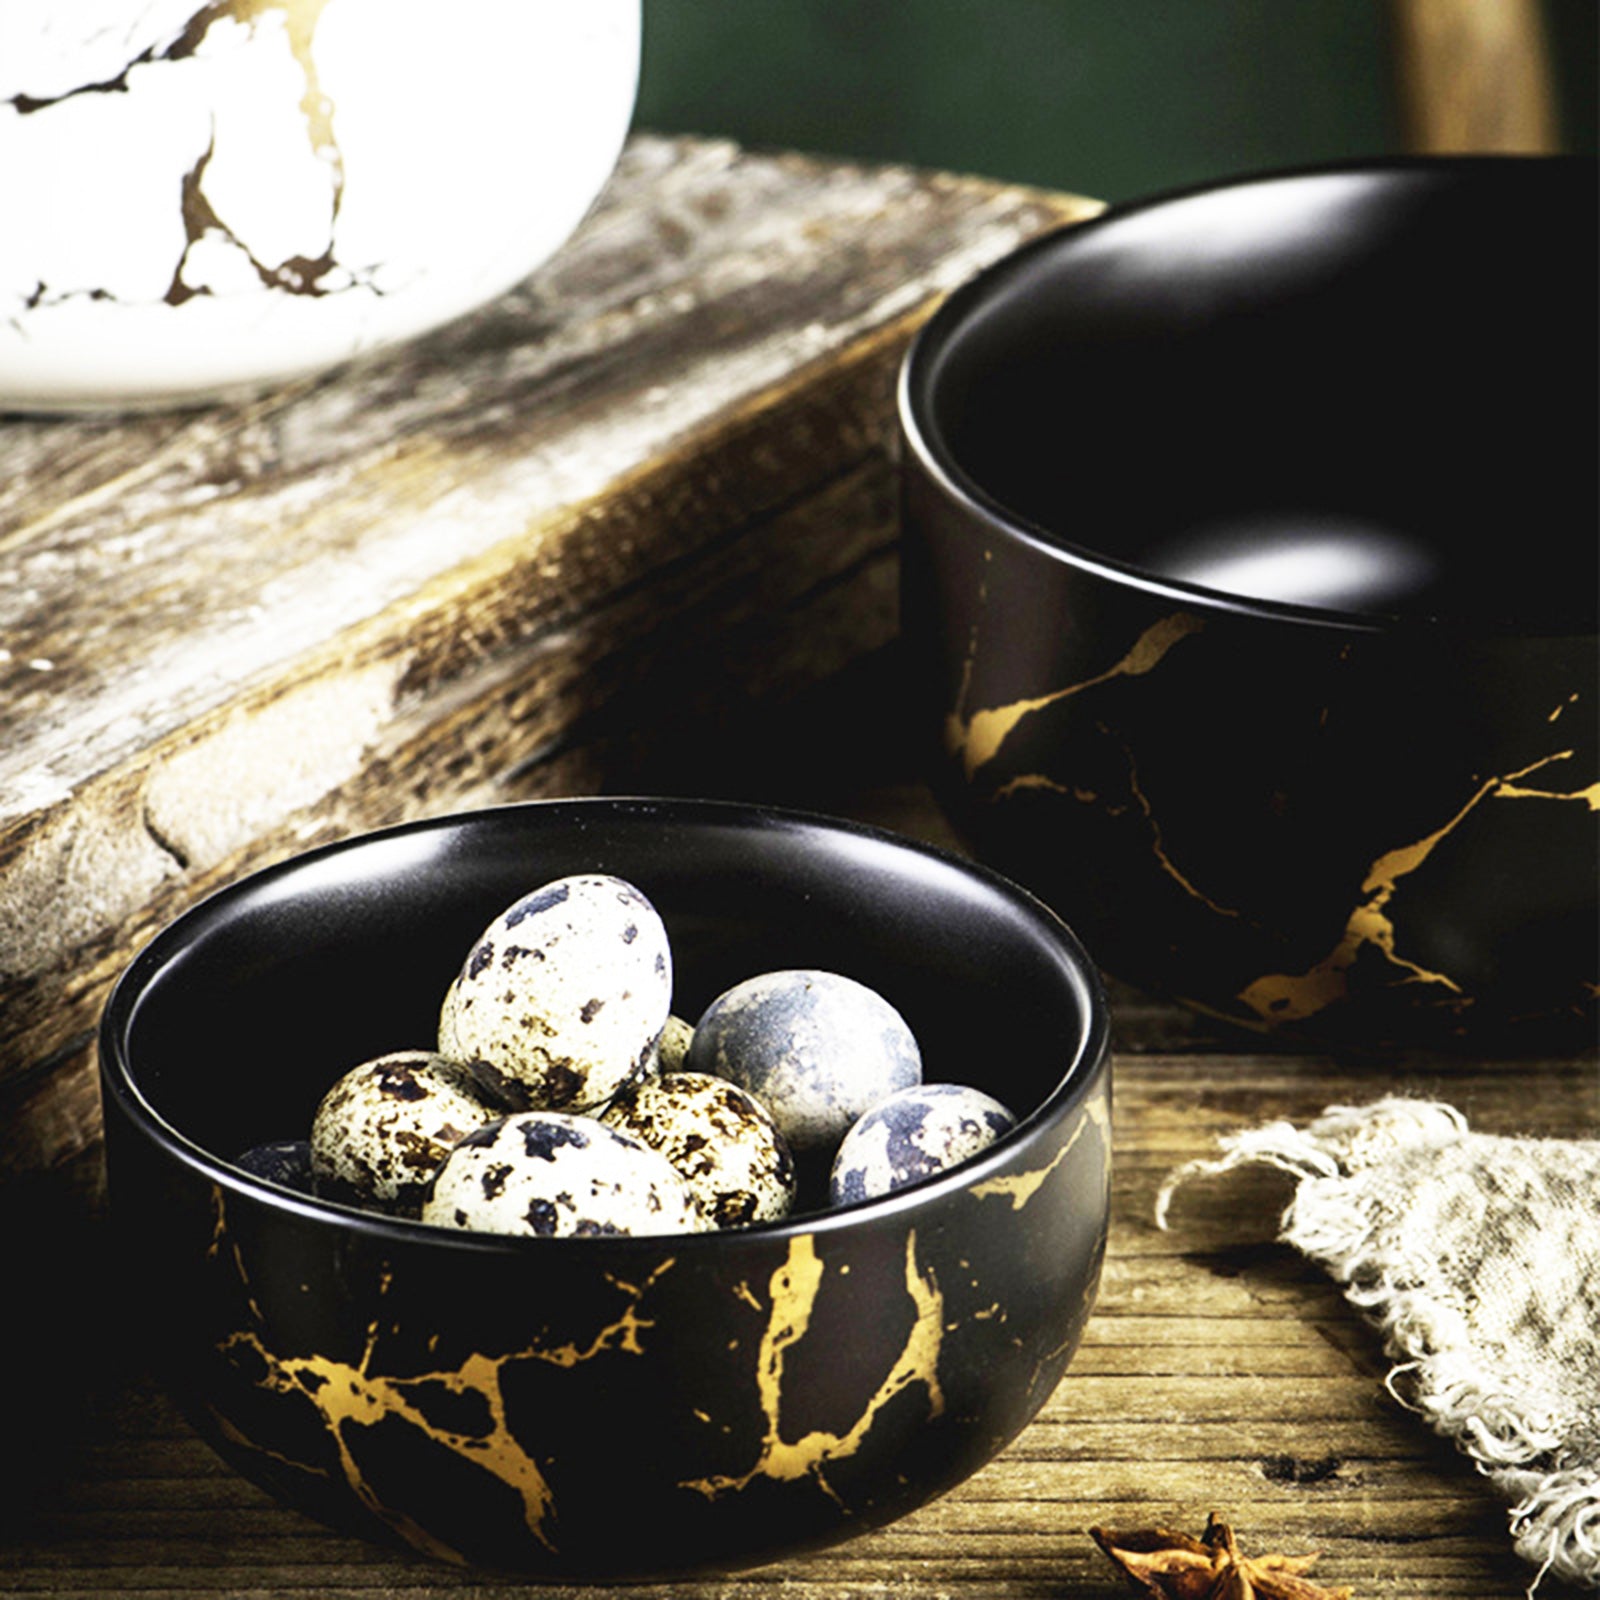 Stylish Classic Marble Pattern Bowls - Choose from 2 Styles